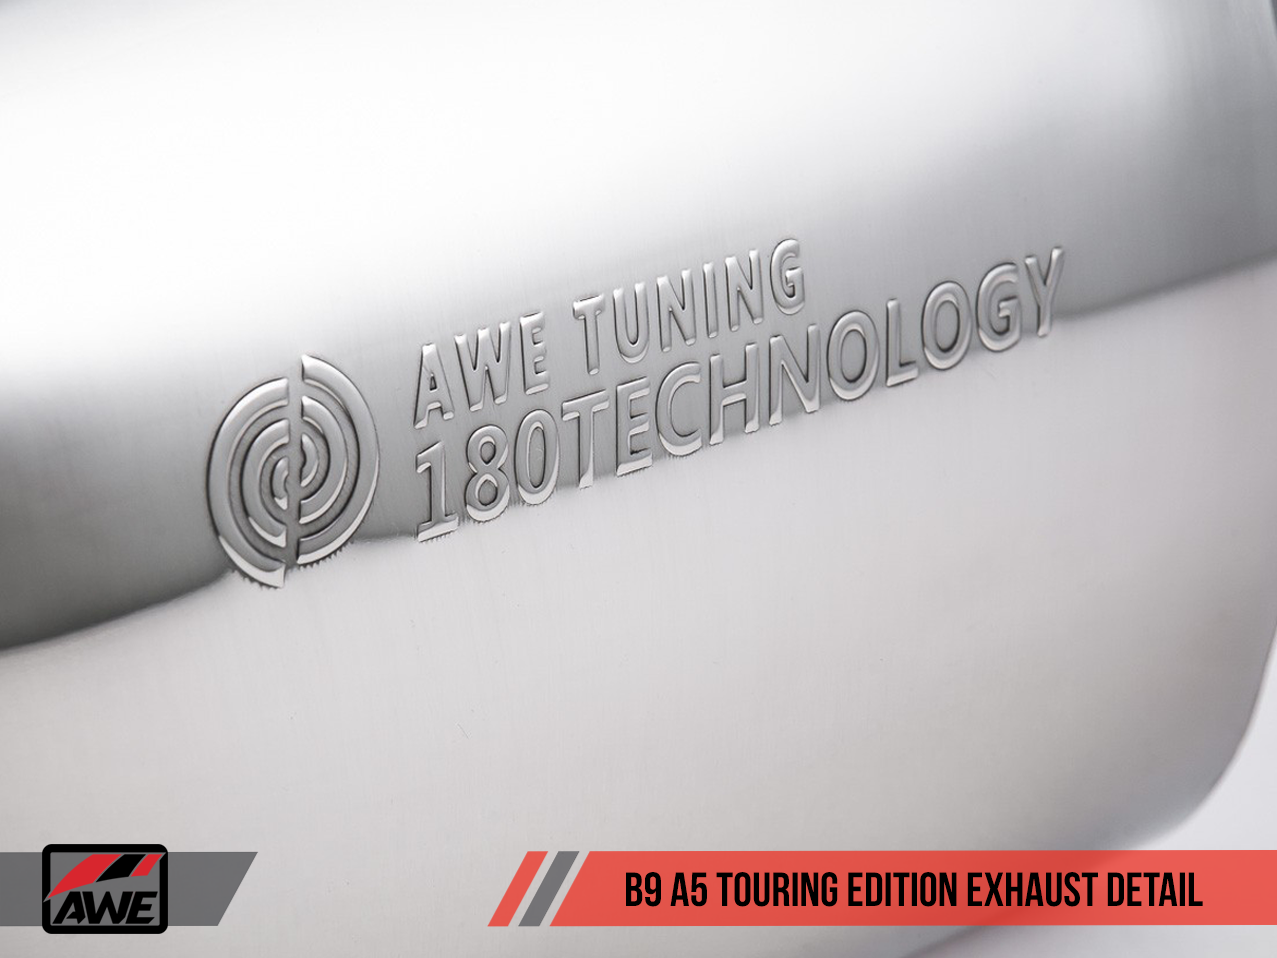 AWE Touring Edition Exhaust for B9 A5, Dual Outlet - Diamond Black Tips (includes DP) - 0